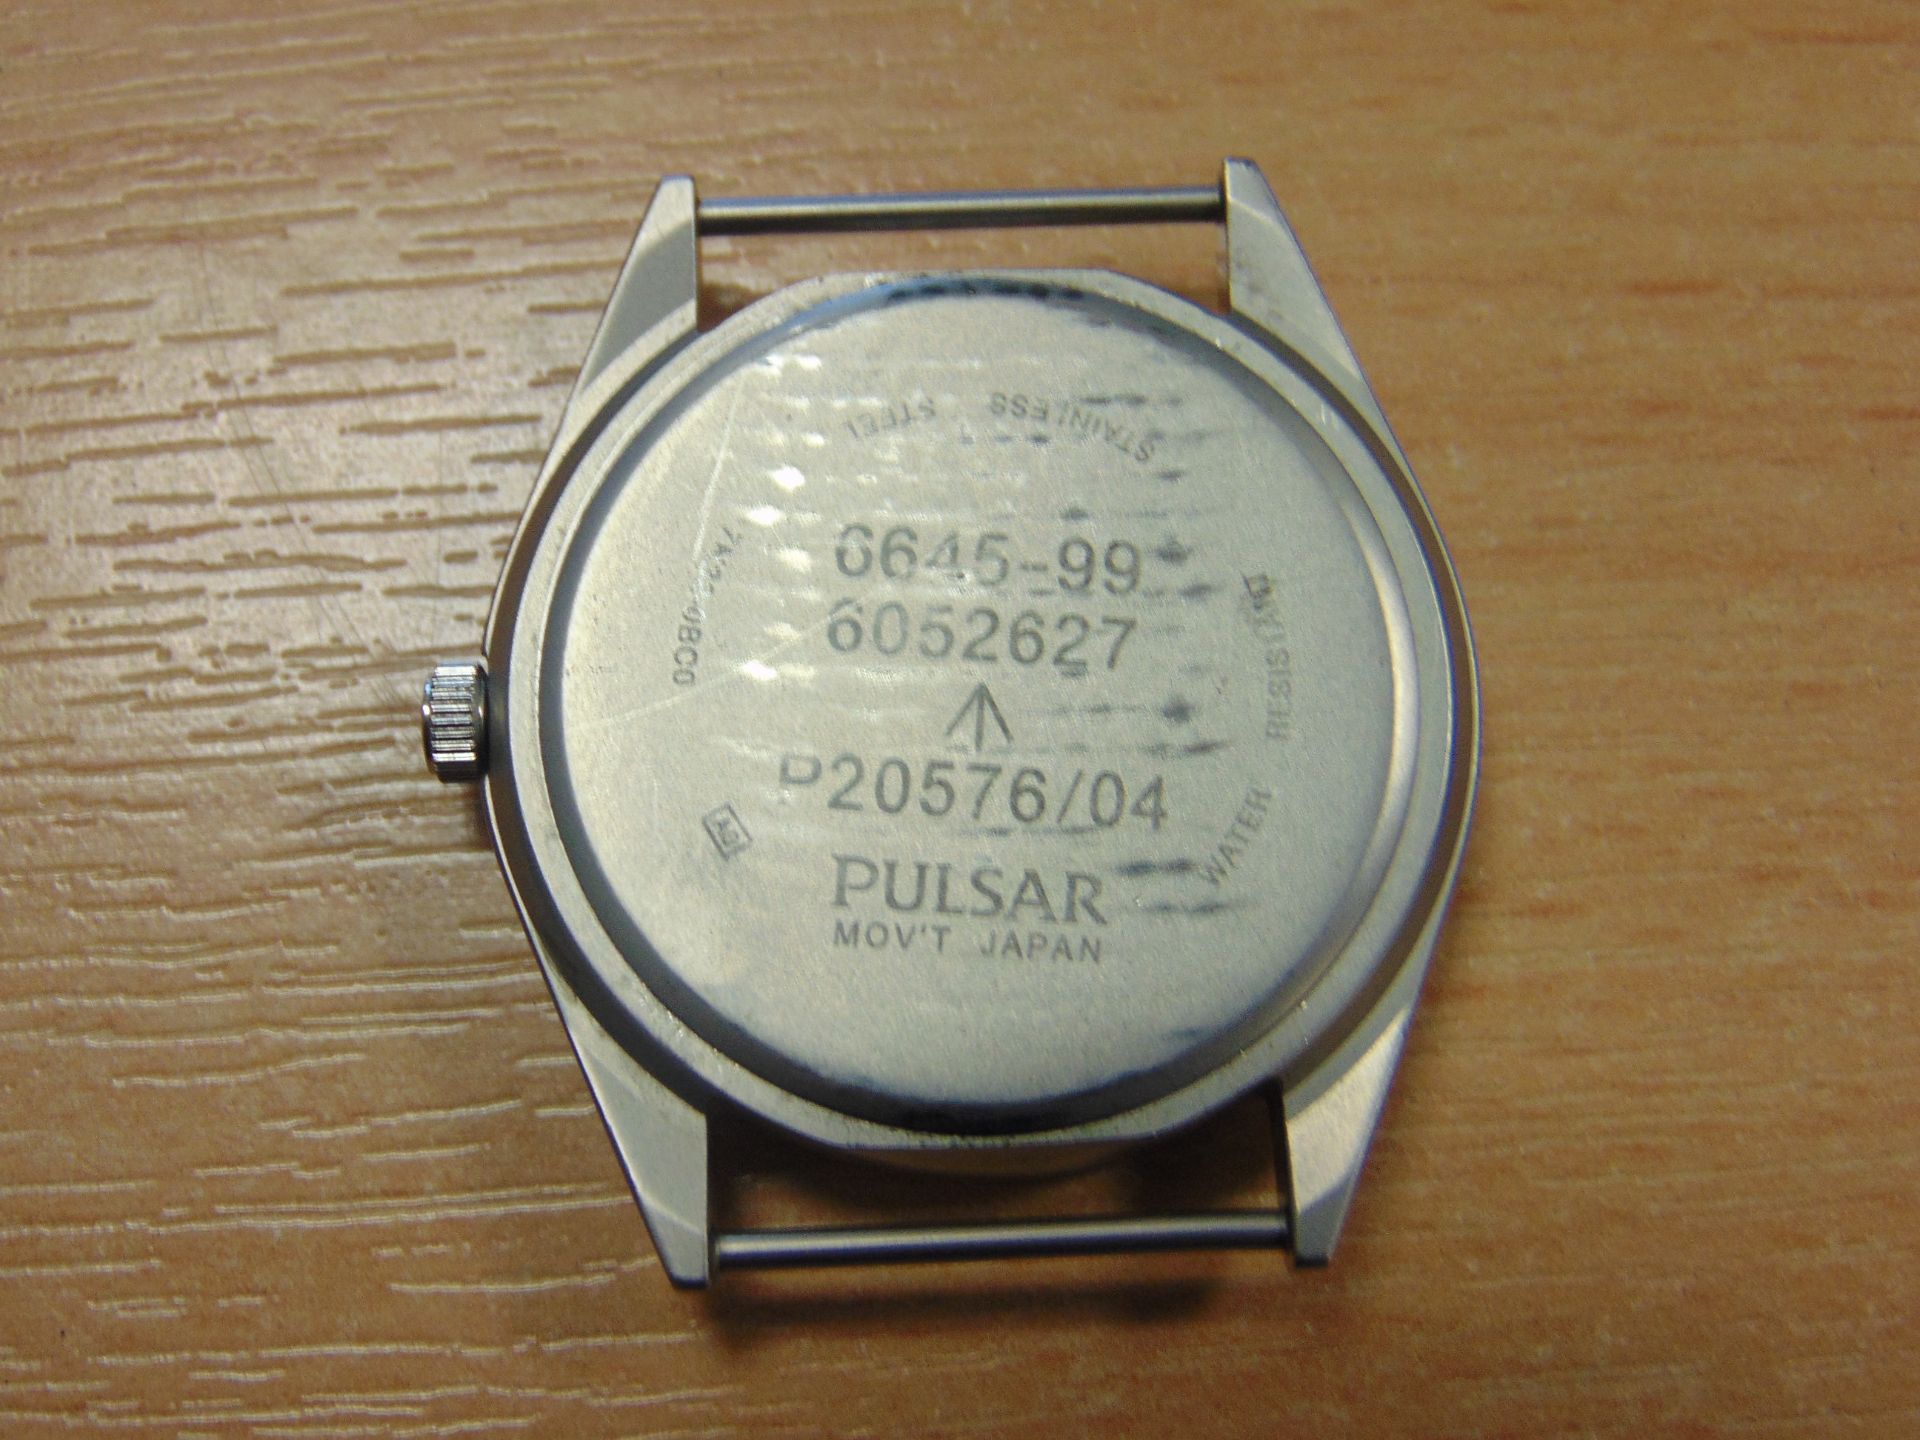 PULSAR W10 BRITISH ISSUE SERVICE WATCH NATO MARKINGS DATED 2004 - Image 8 of 12